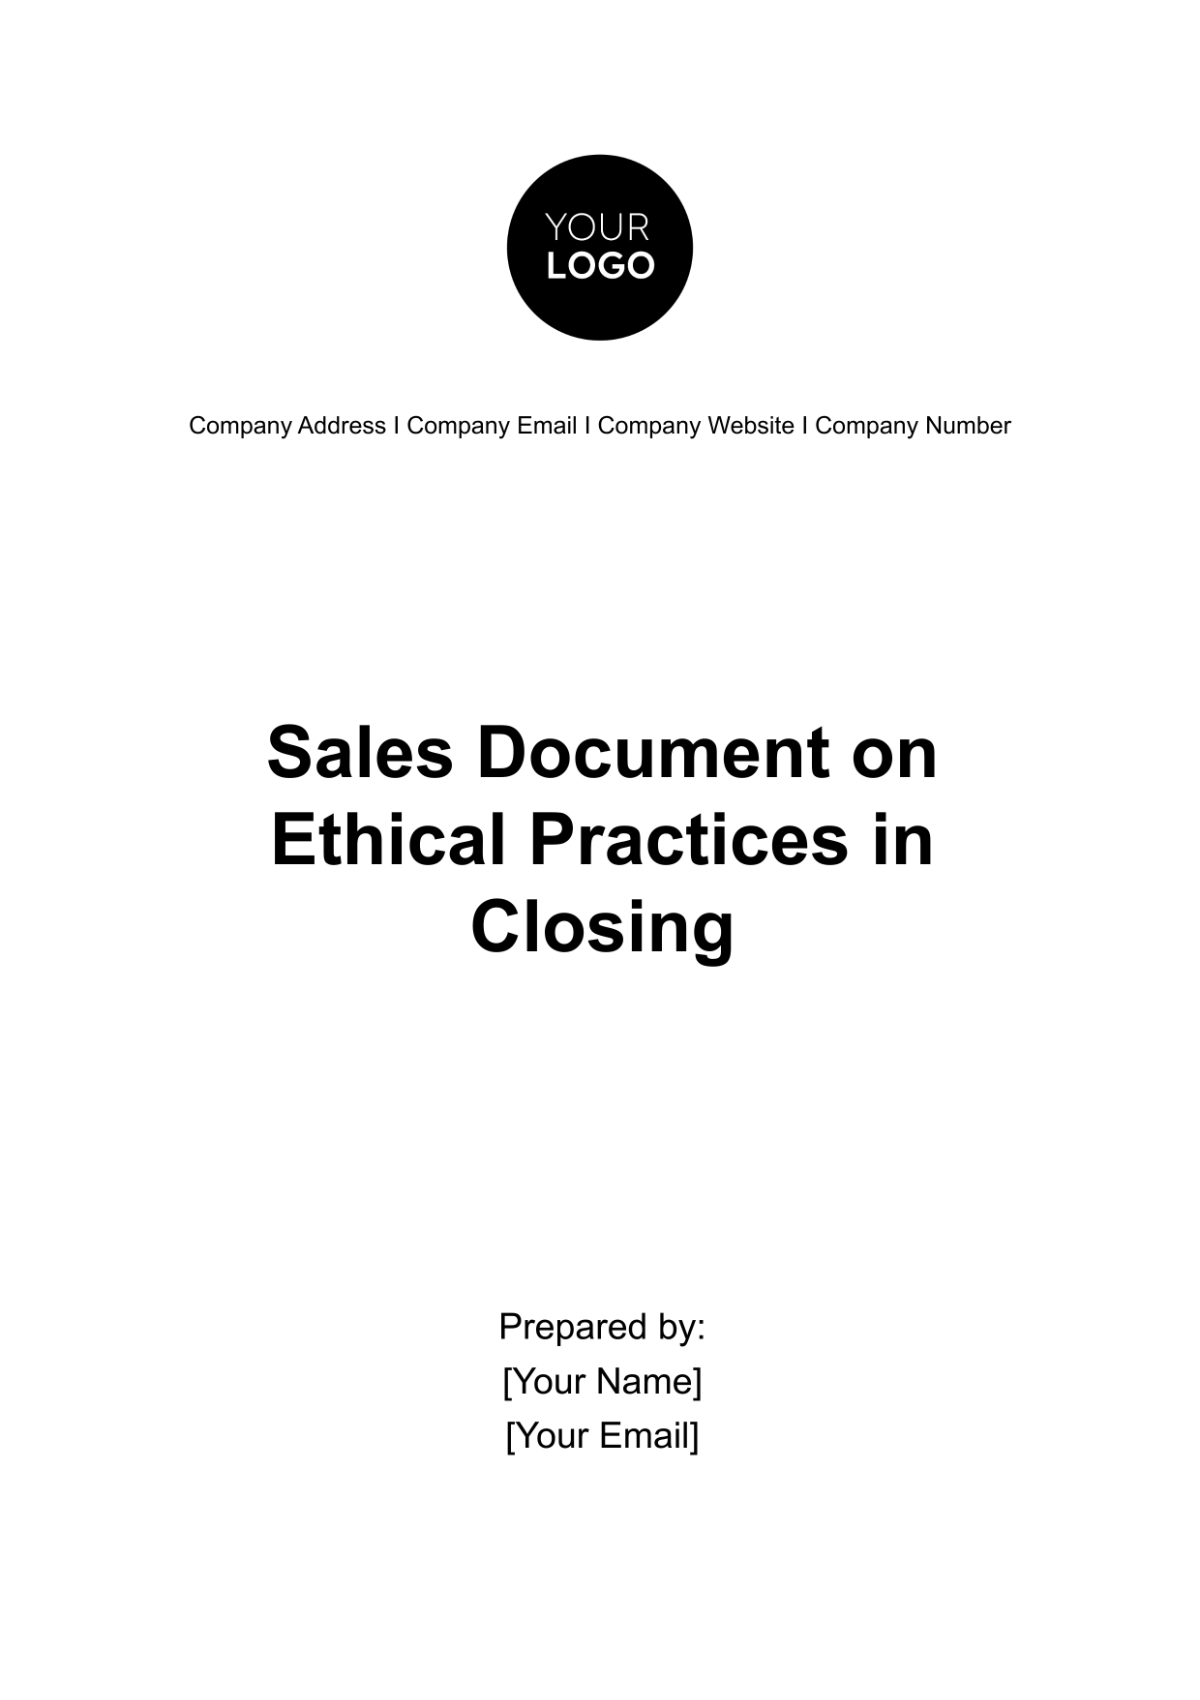 Sales Document on Ethical Practices in Closing Template